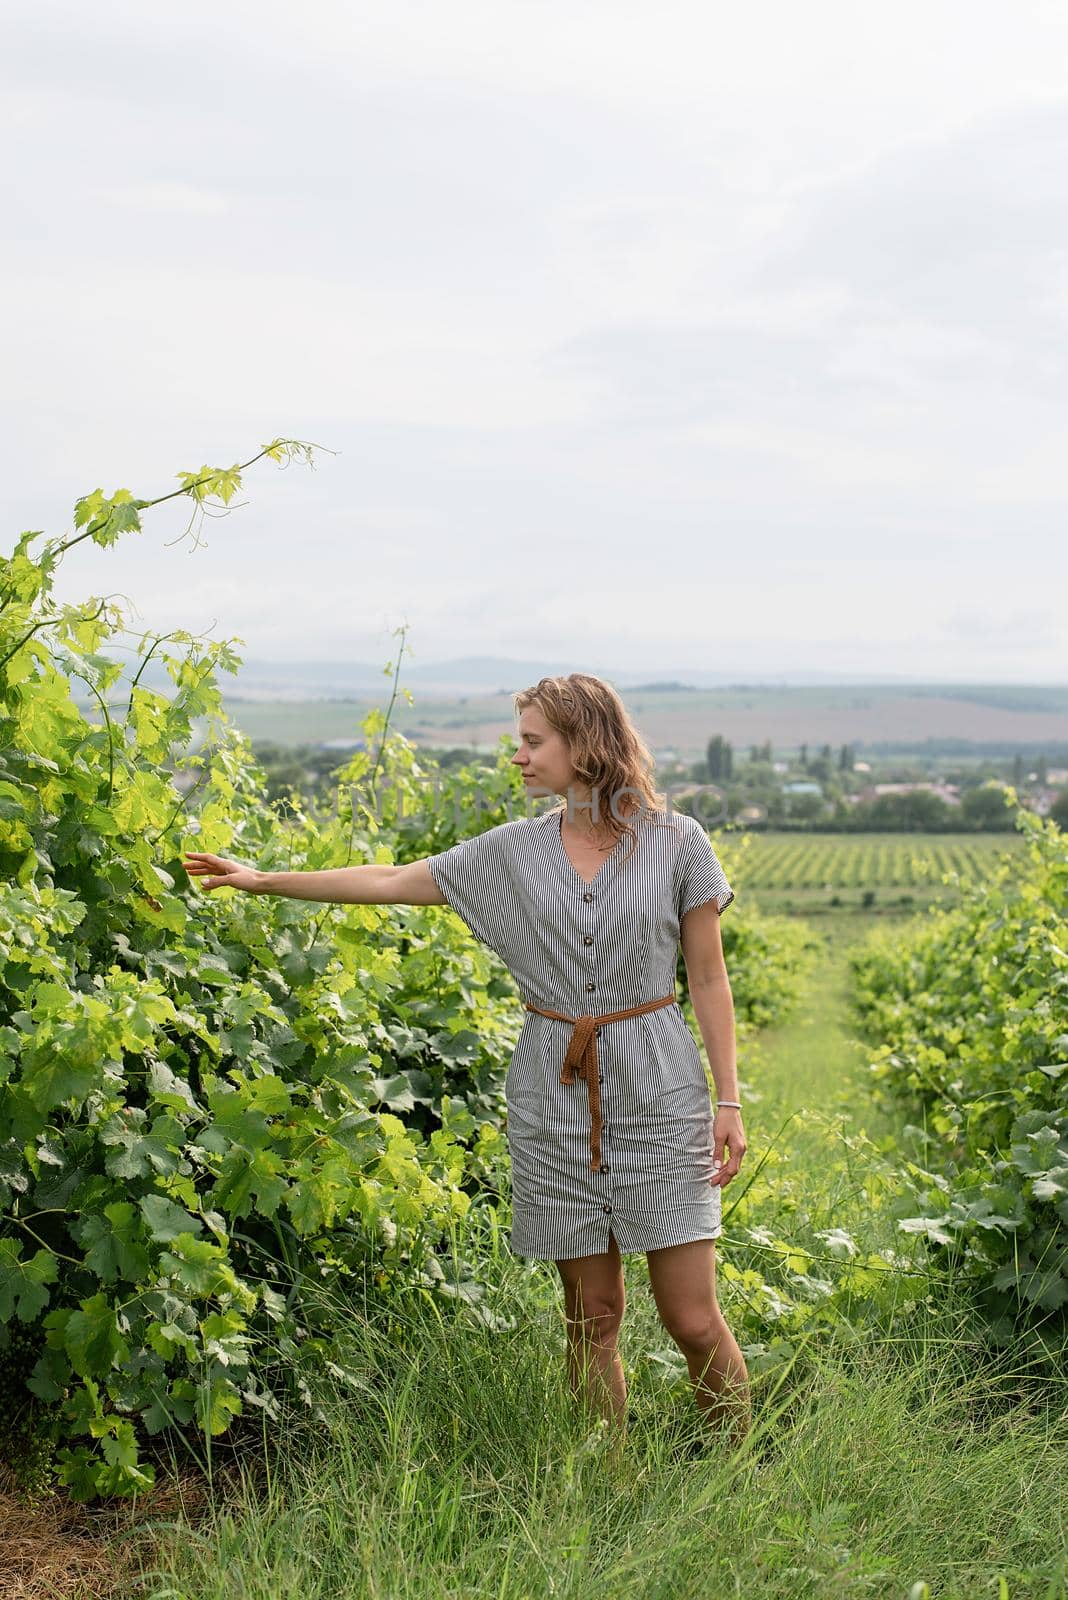 Woman walking in a vineyard, touching the leaves by Desperada